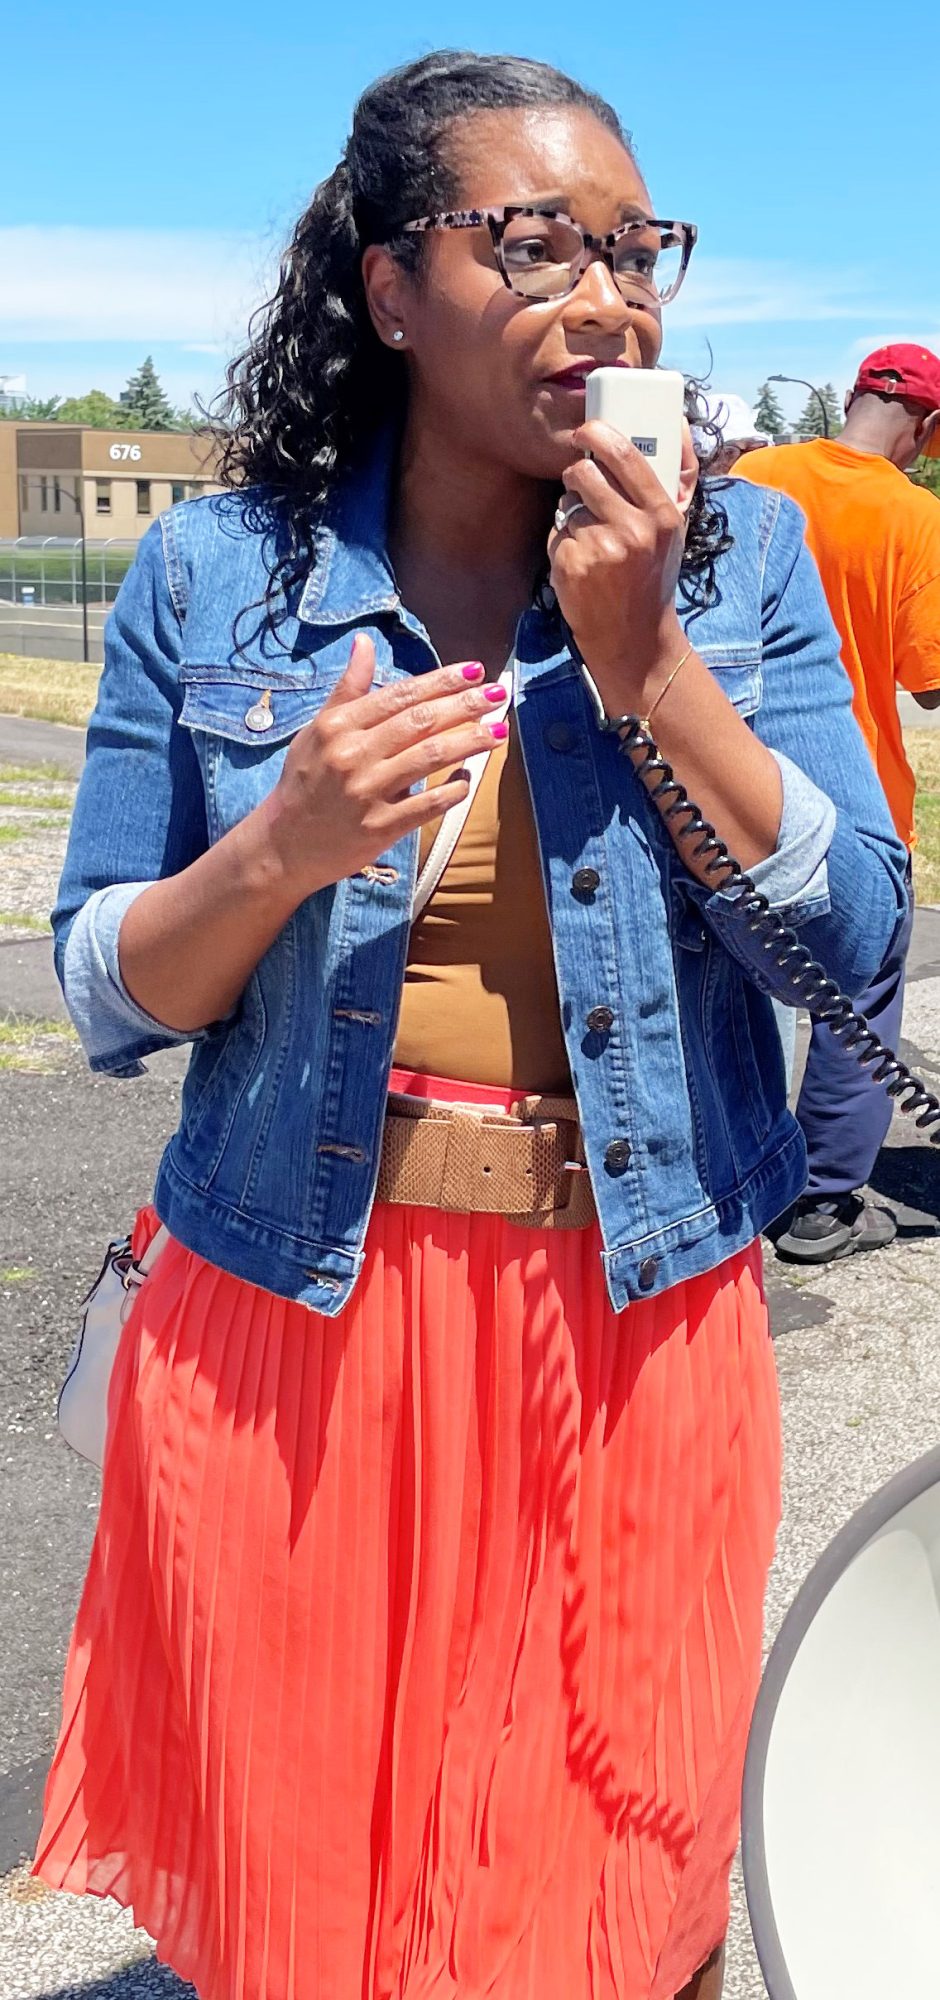 State Rap Emelia Sykes questions the capture tactics of police on young Black men and why it took eight officers to bring down on unarmed man with over 90 bullets.” (Reporter photo)